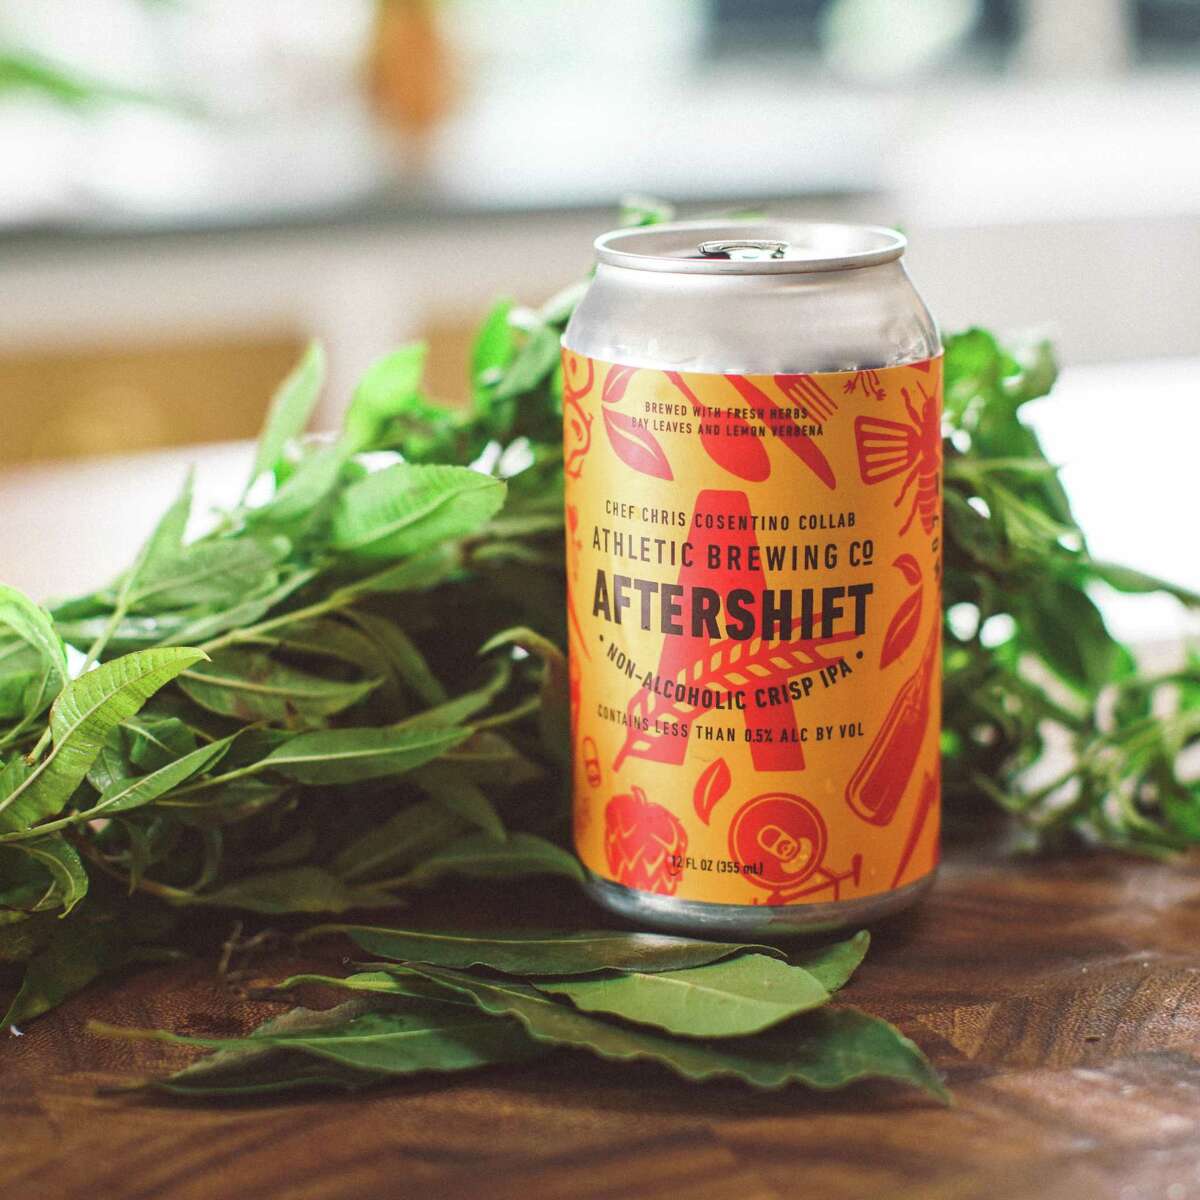 Chef Chris Cosentino collaborated with Athletic Brewing Company to launch their new nonalcoholic IPA, AfterShift.